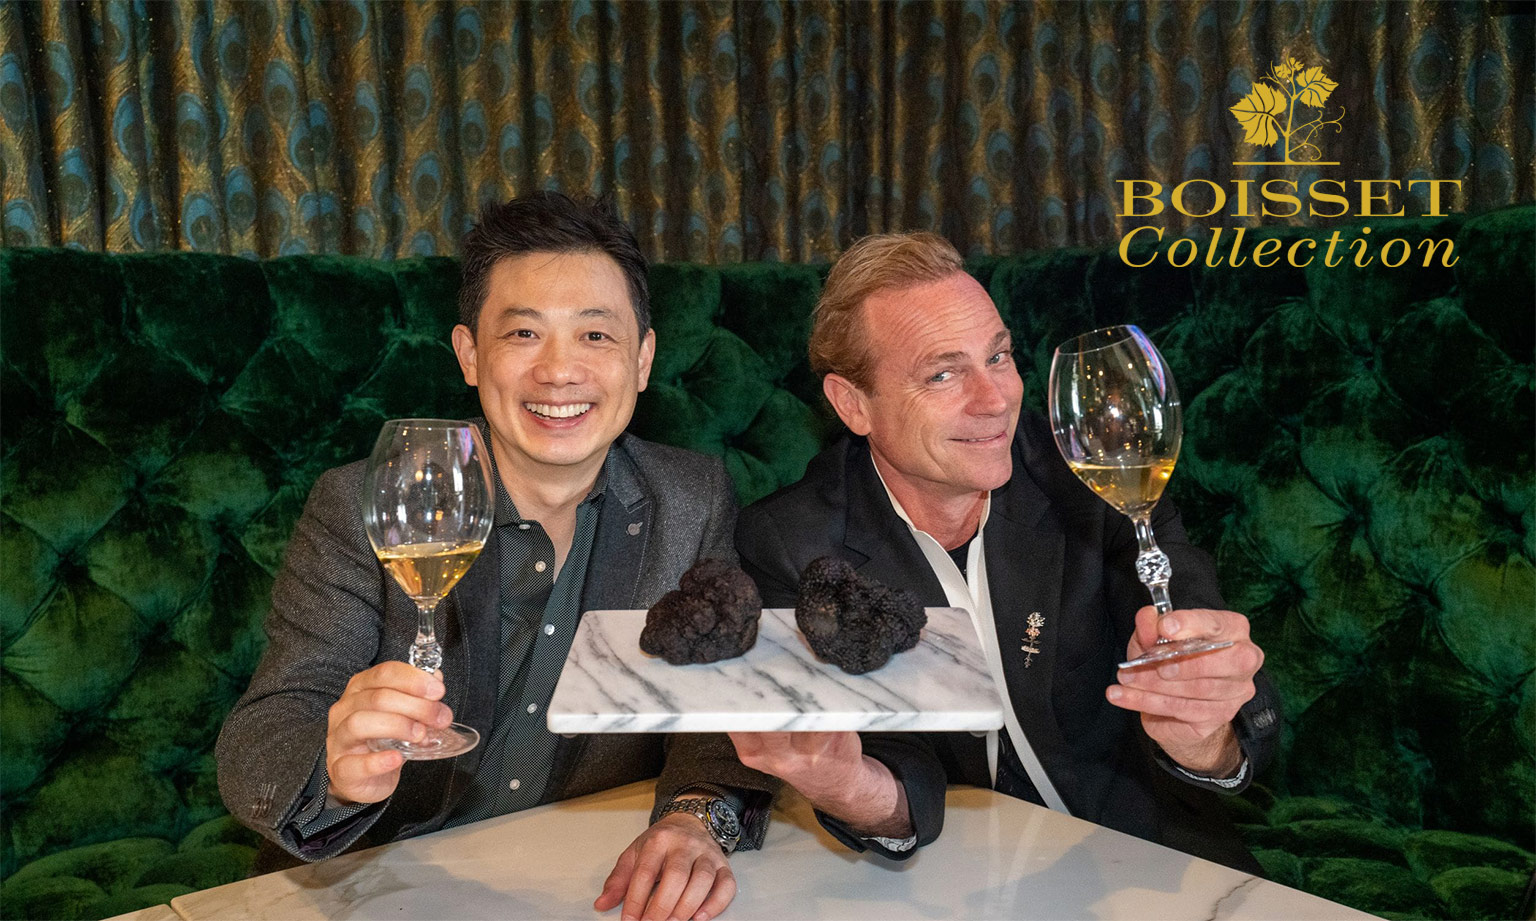 Robert Chang and Jean-Charles Boisset (ATC and Boisset Collection Partnership Slide)